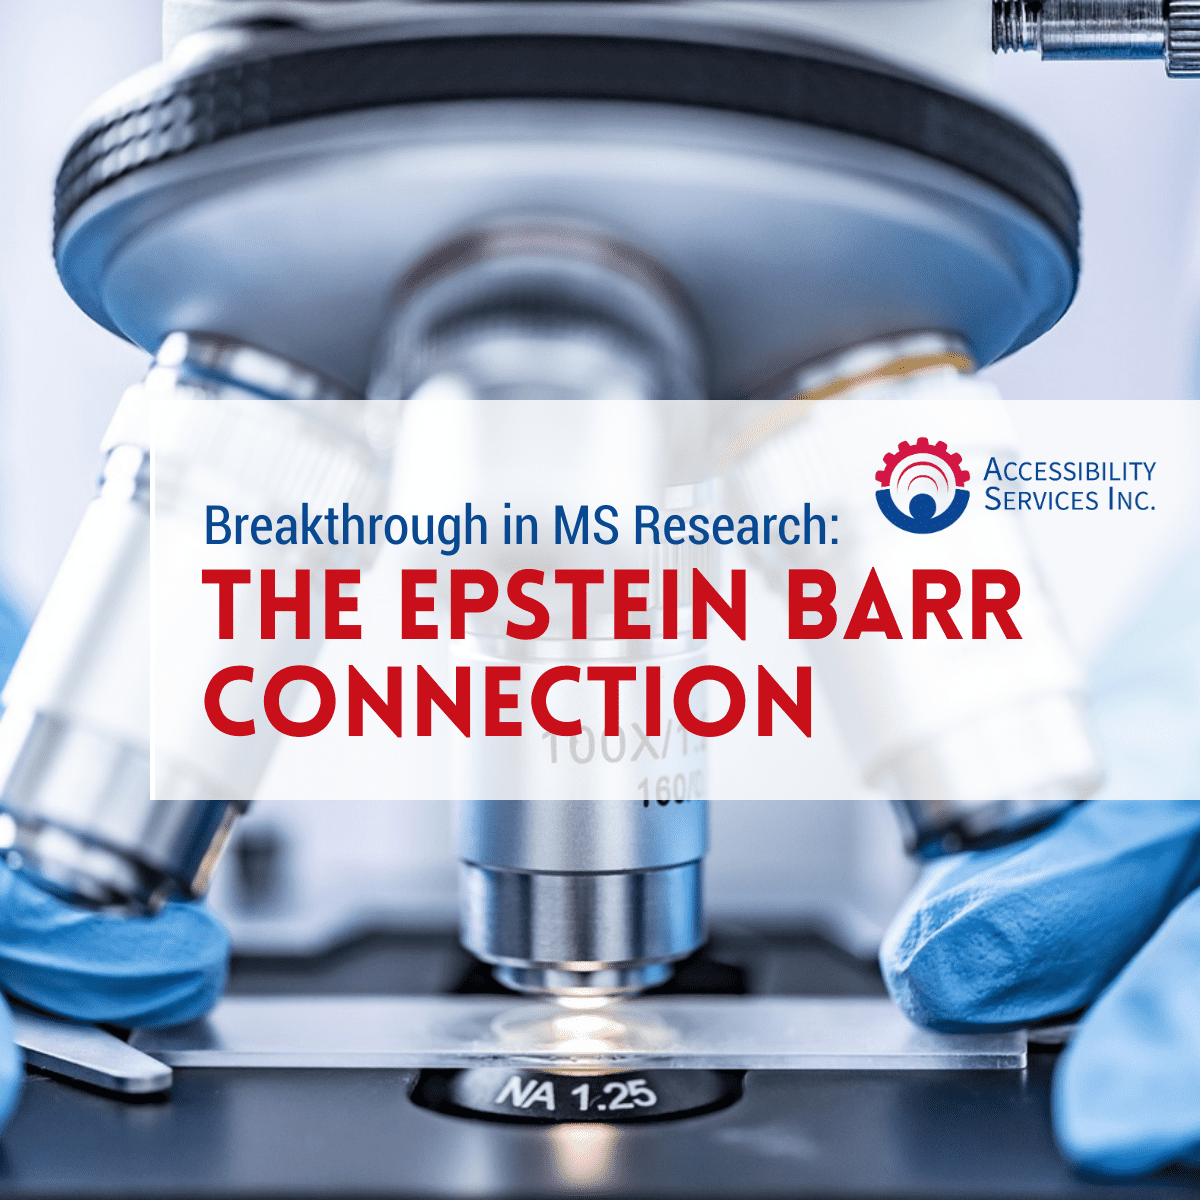 Breakthrough in MS Research: The Epstein Barr Connection